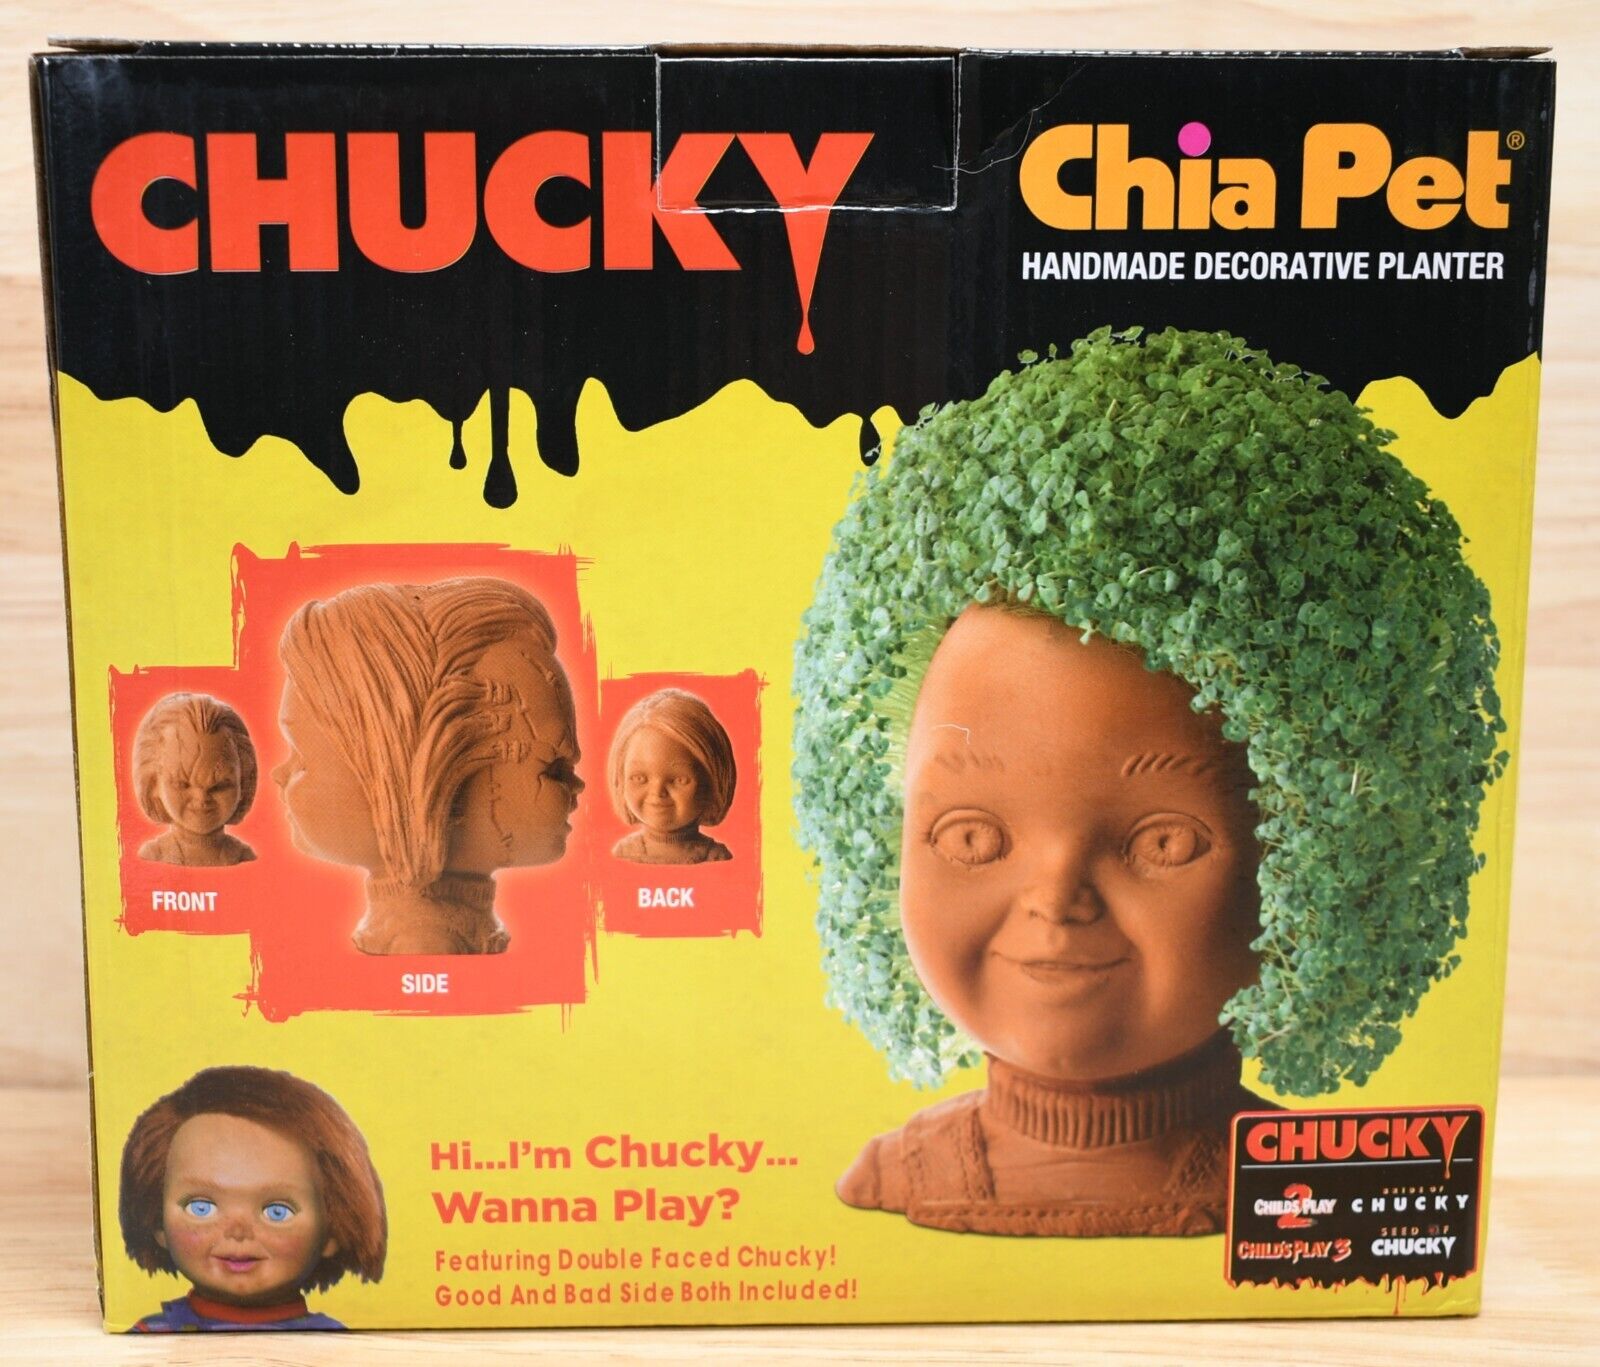 Chia Pet Decorative Planter Child's Play Chucky (Seed Expiration Date July 2023)